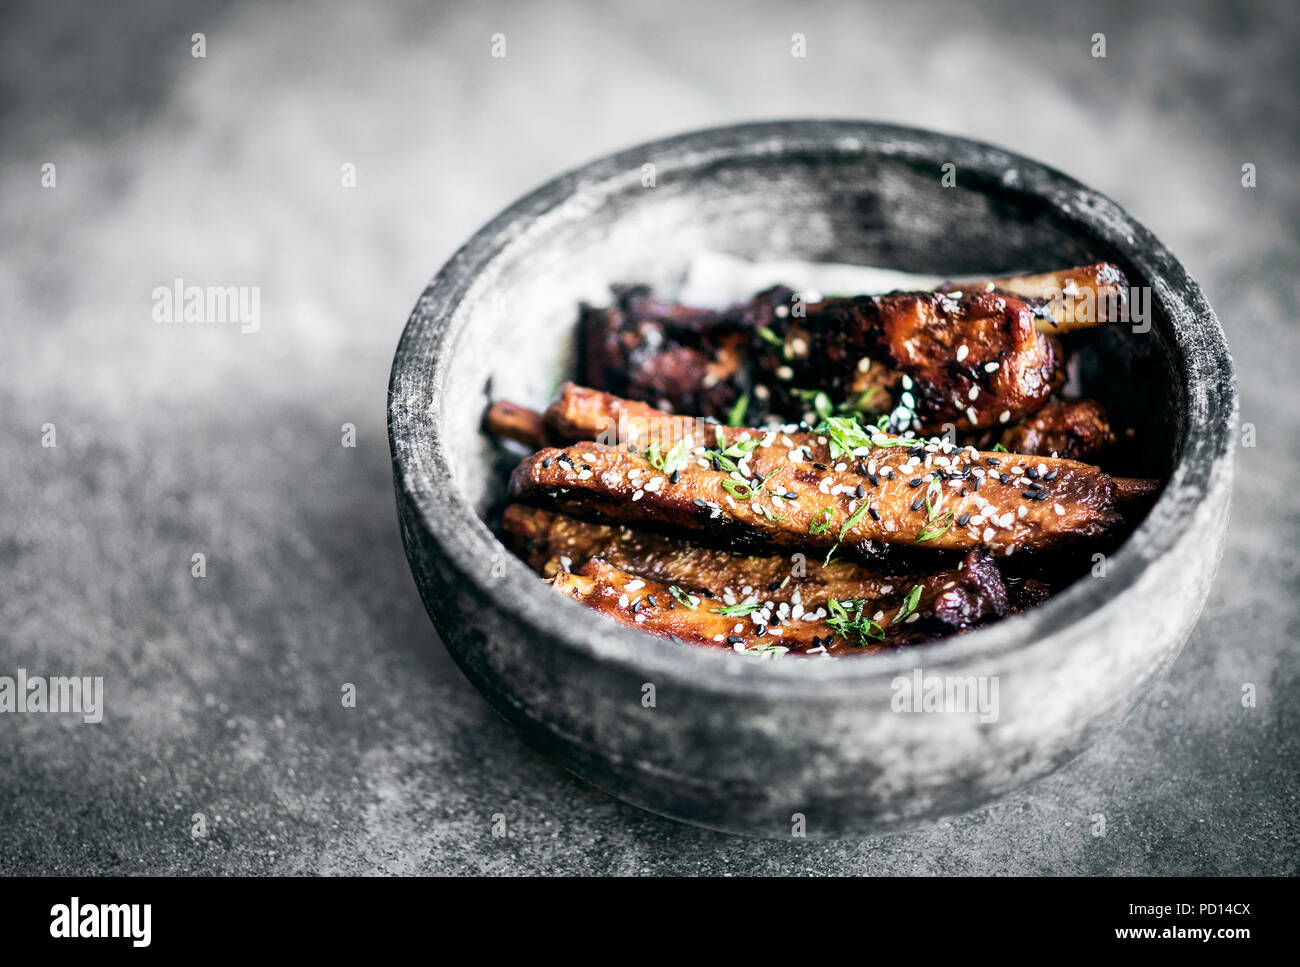 modern gourmet asian style barbeque spicy pork ribs with sweet soy sauce Stock Photo